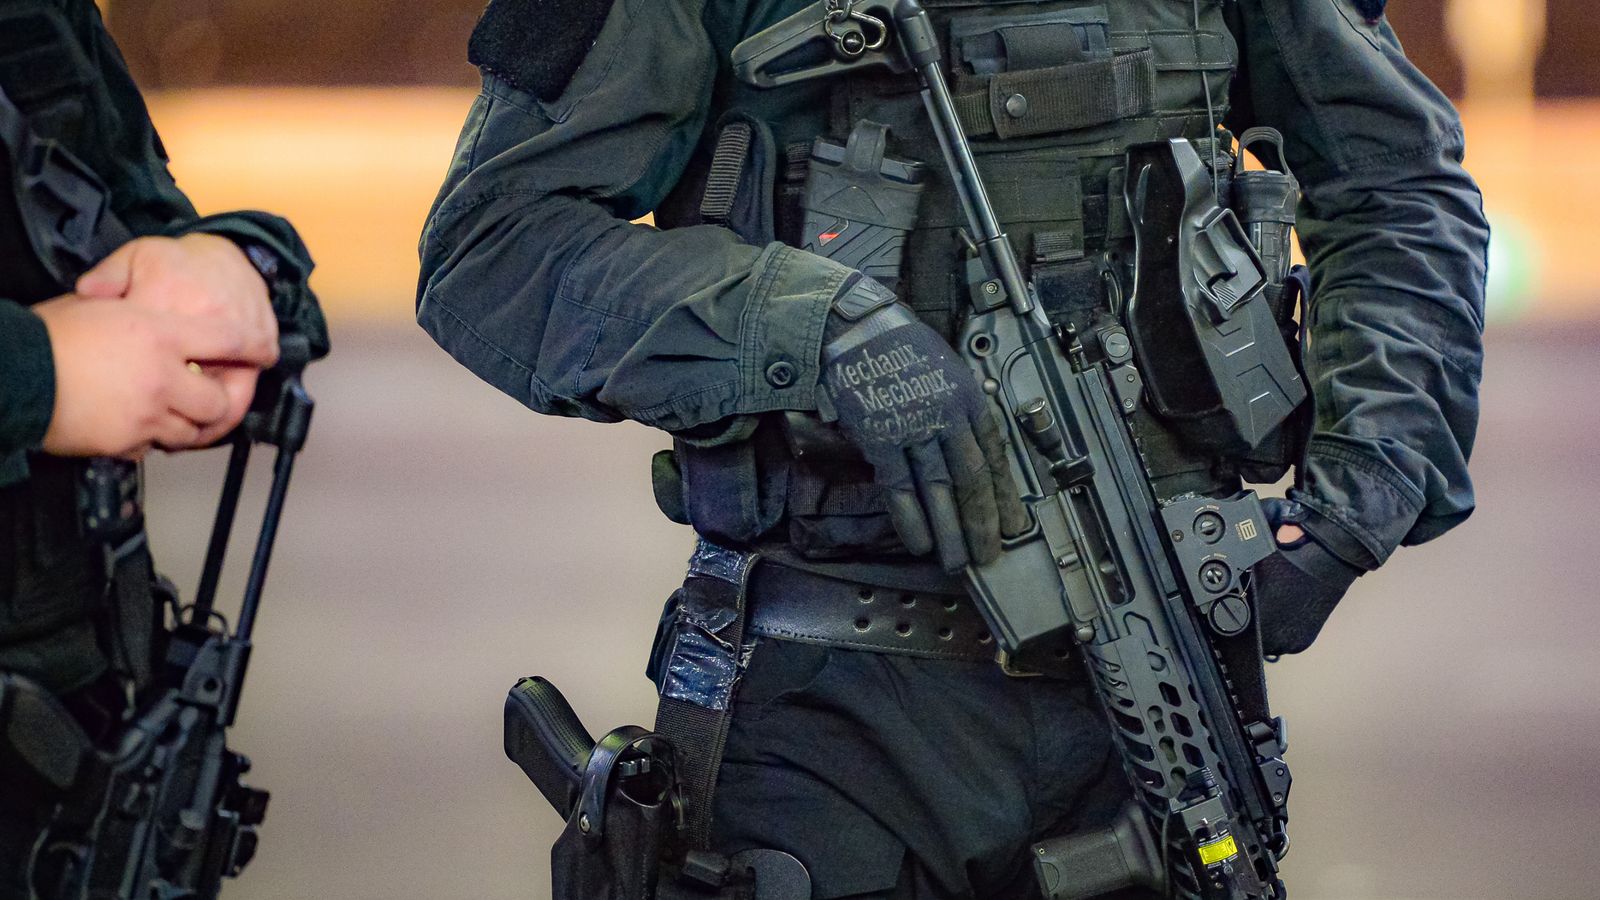 Will armed officer's murder charge force change in how police shootings are reported?